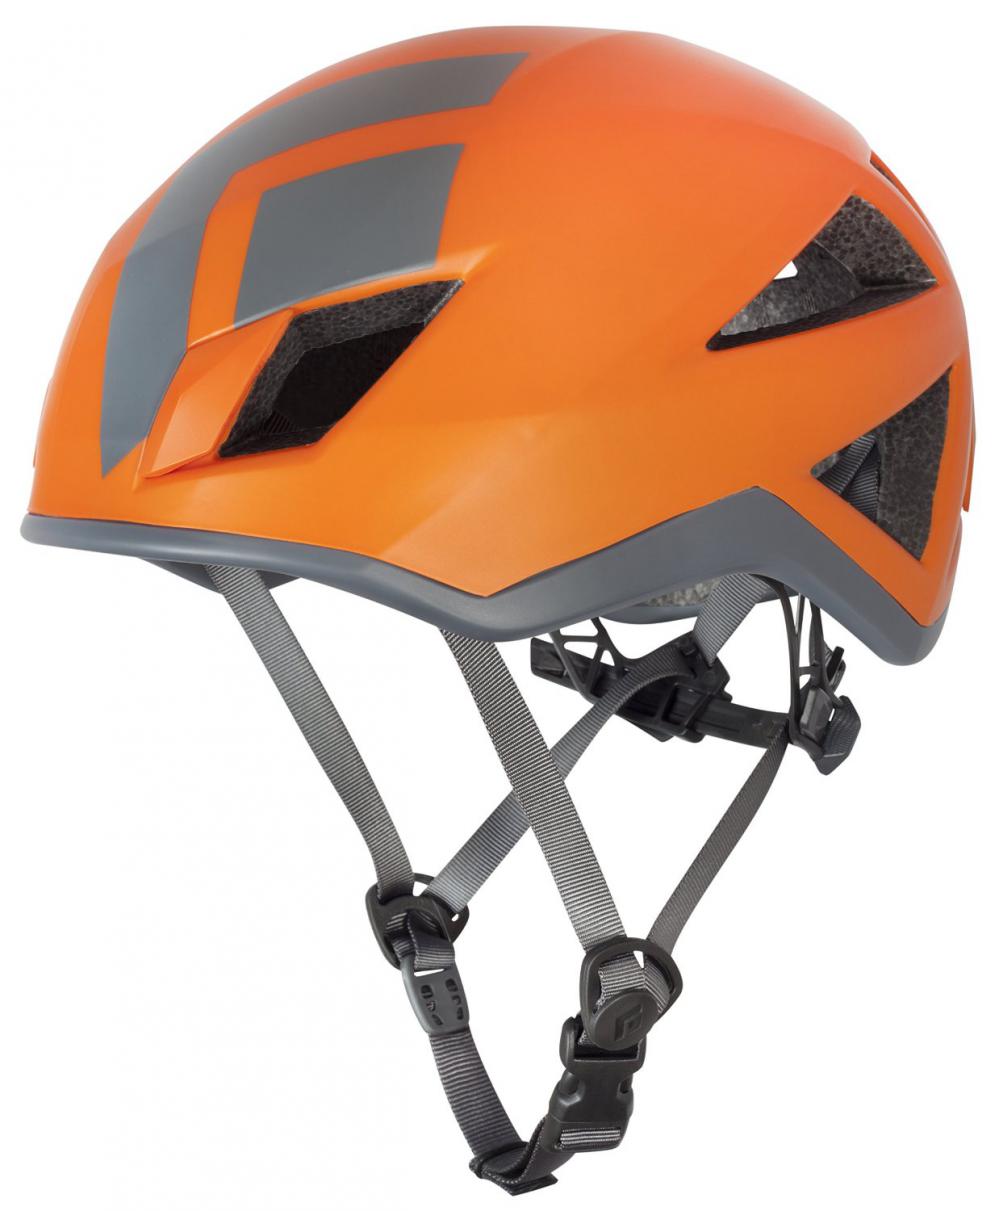 Bicycle Helmet for Child Safety